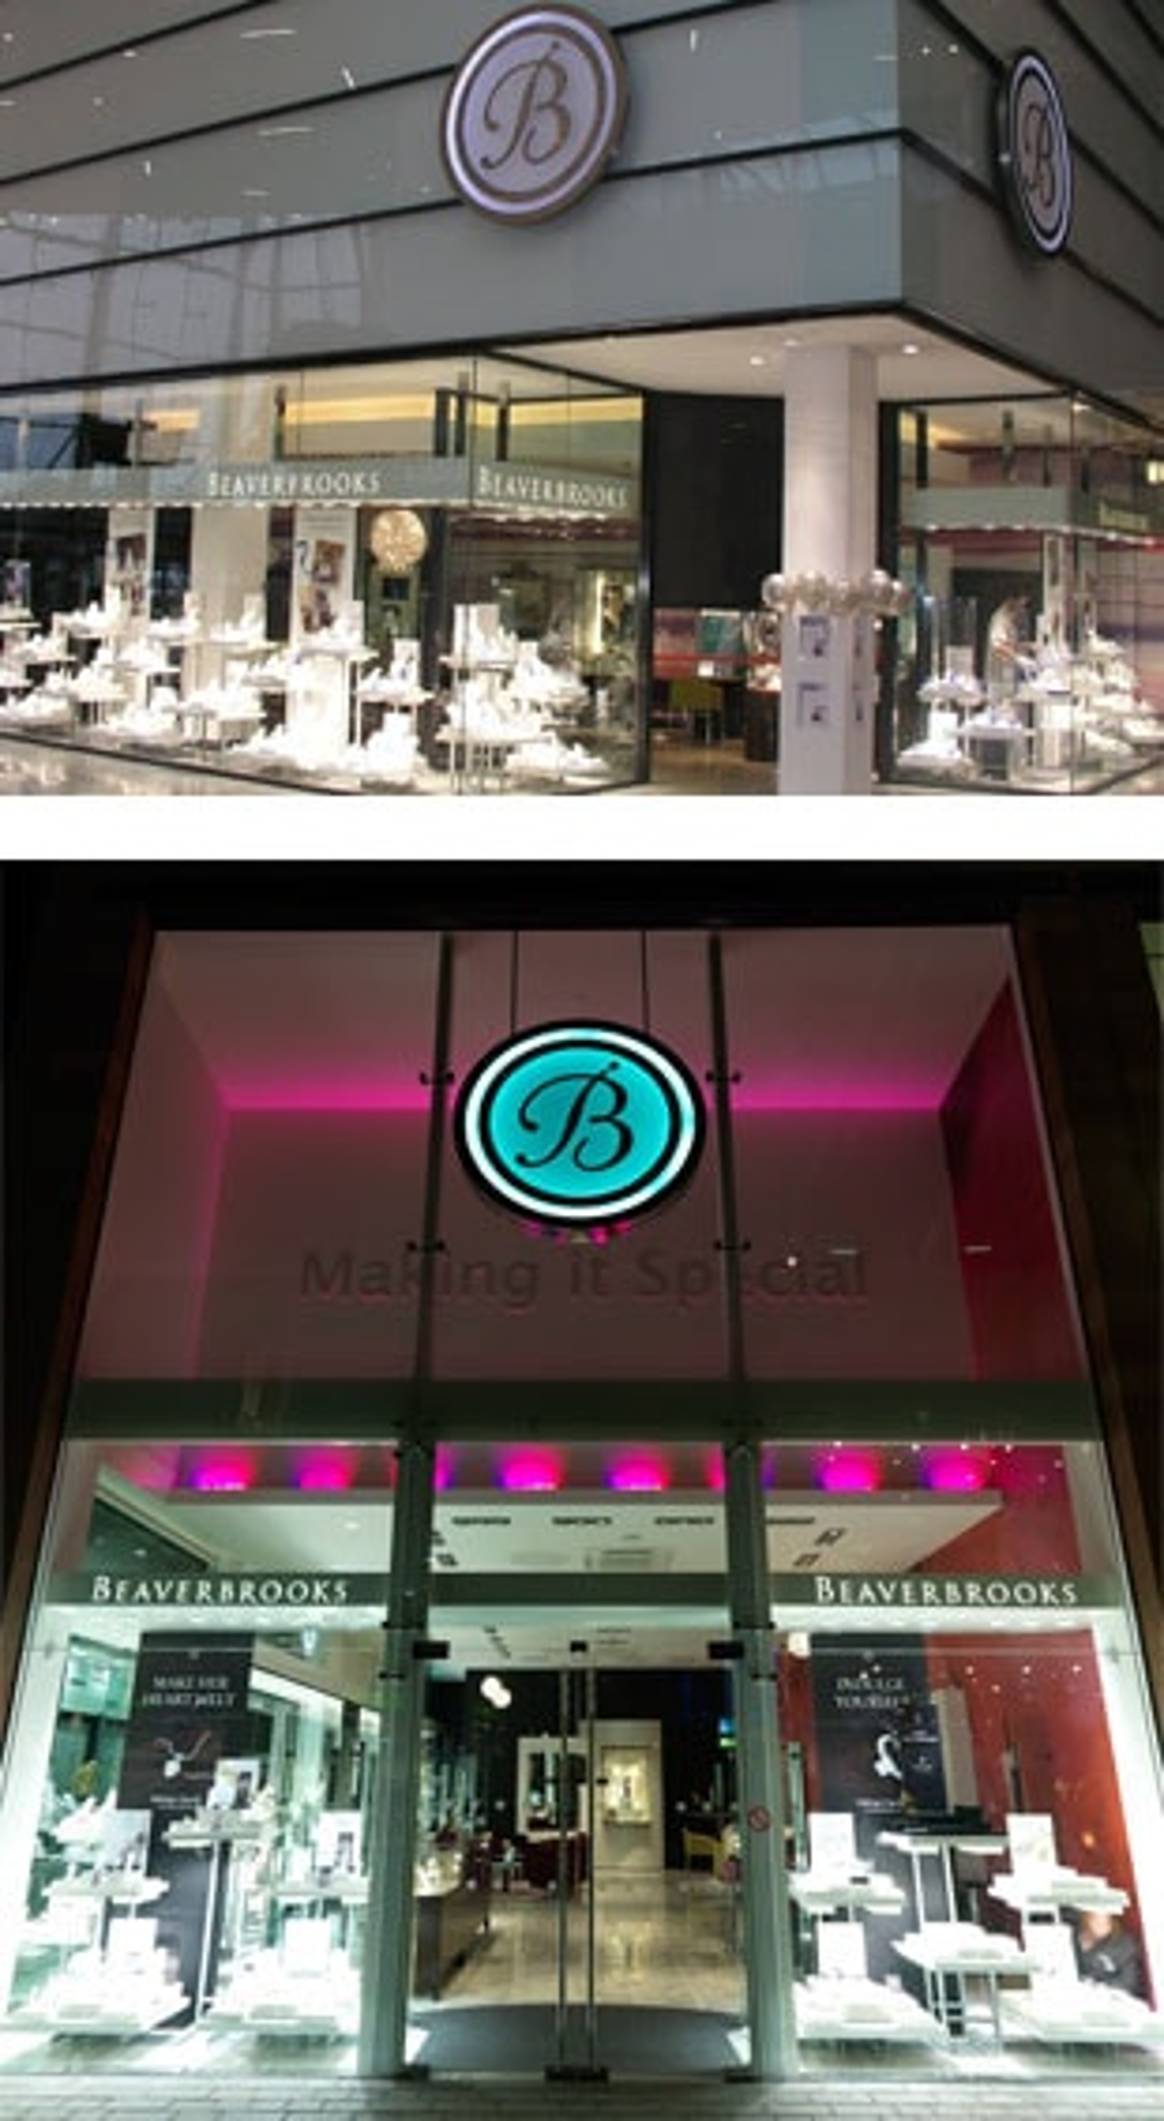 Beaverbrooks the Jewellers selects K3 Retail to fulfil multichannel ambitions